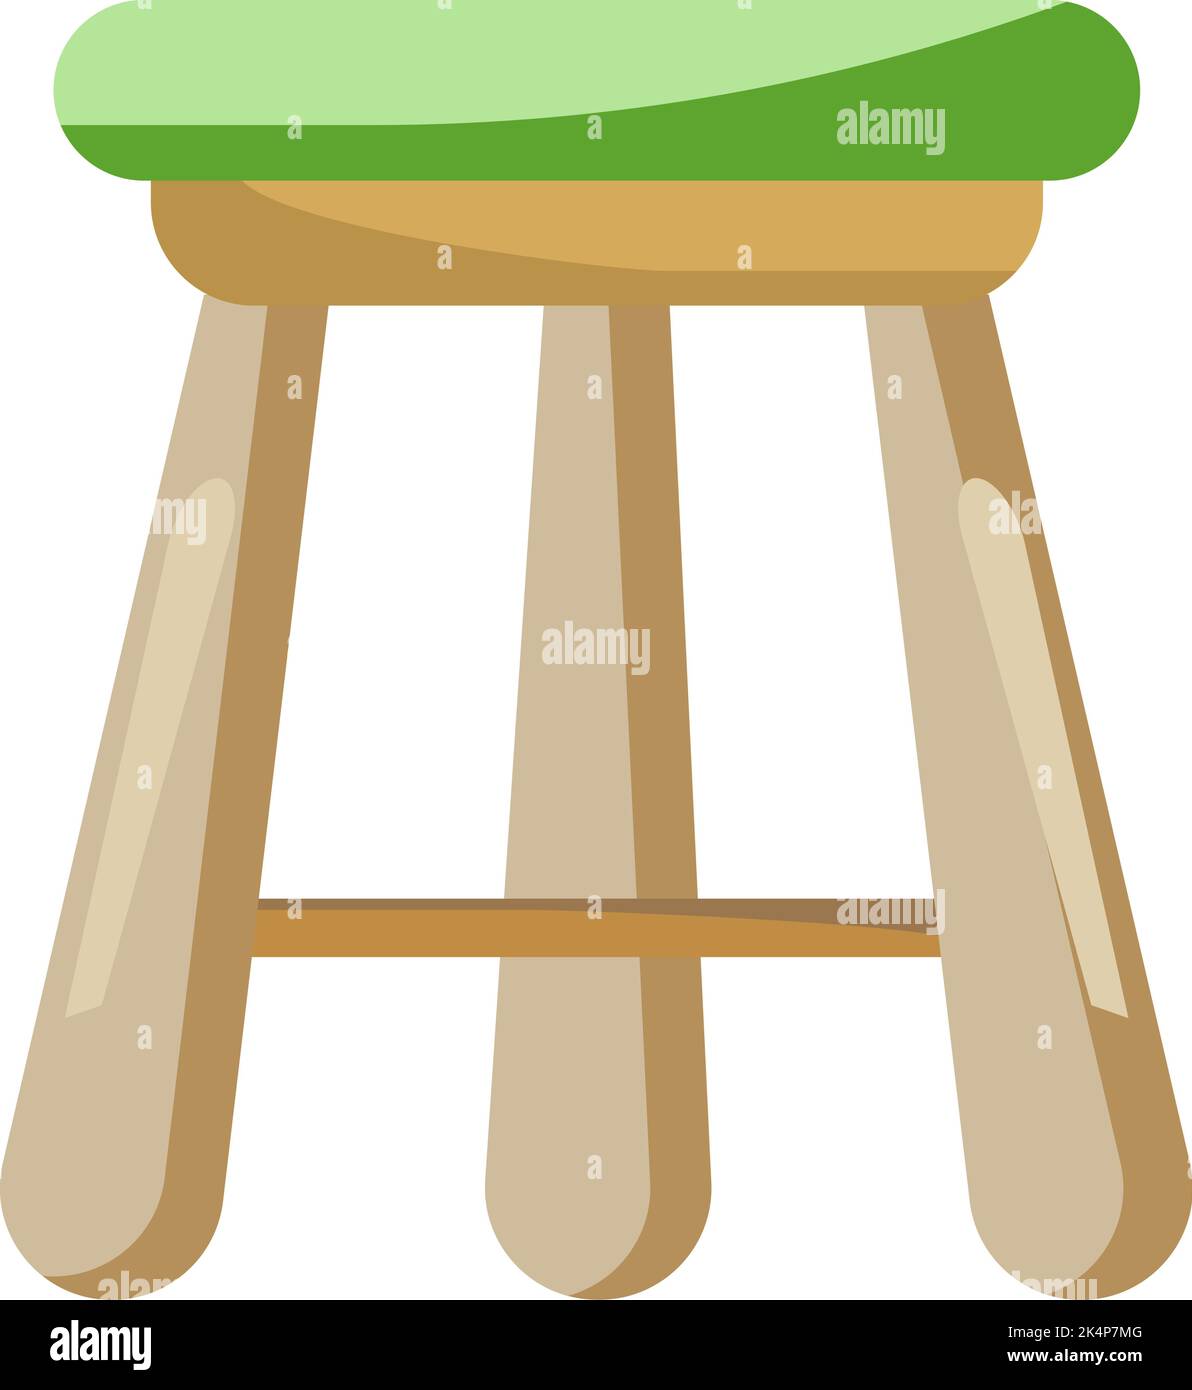 Wooden stool with green sitting pillow, illustration, vector on a white background. Stock Vector